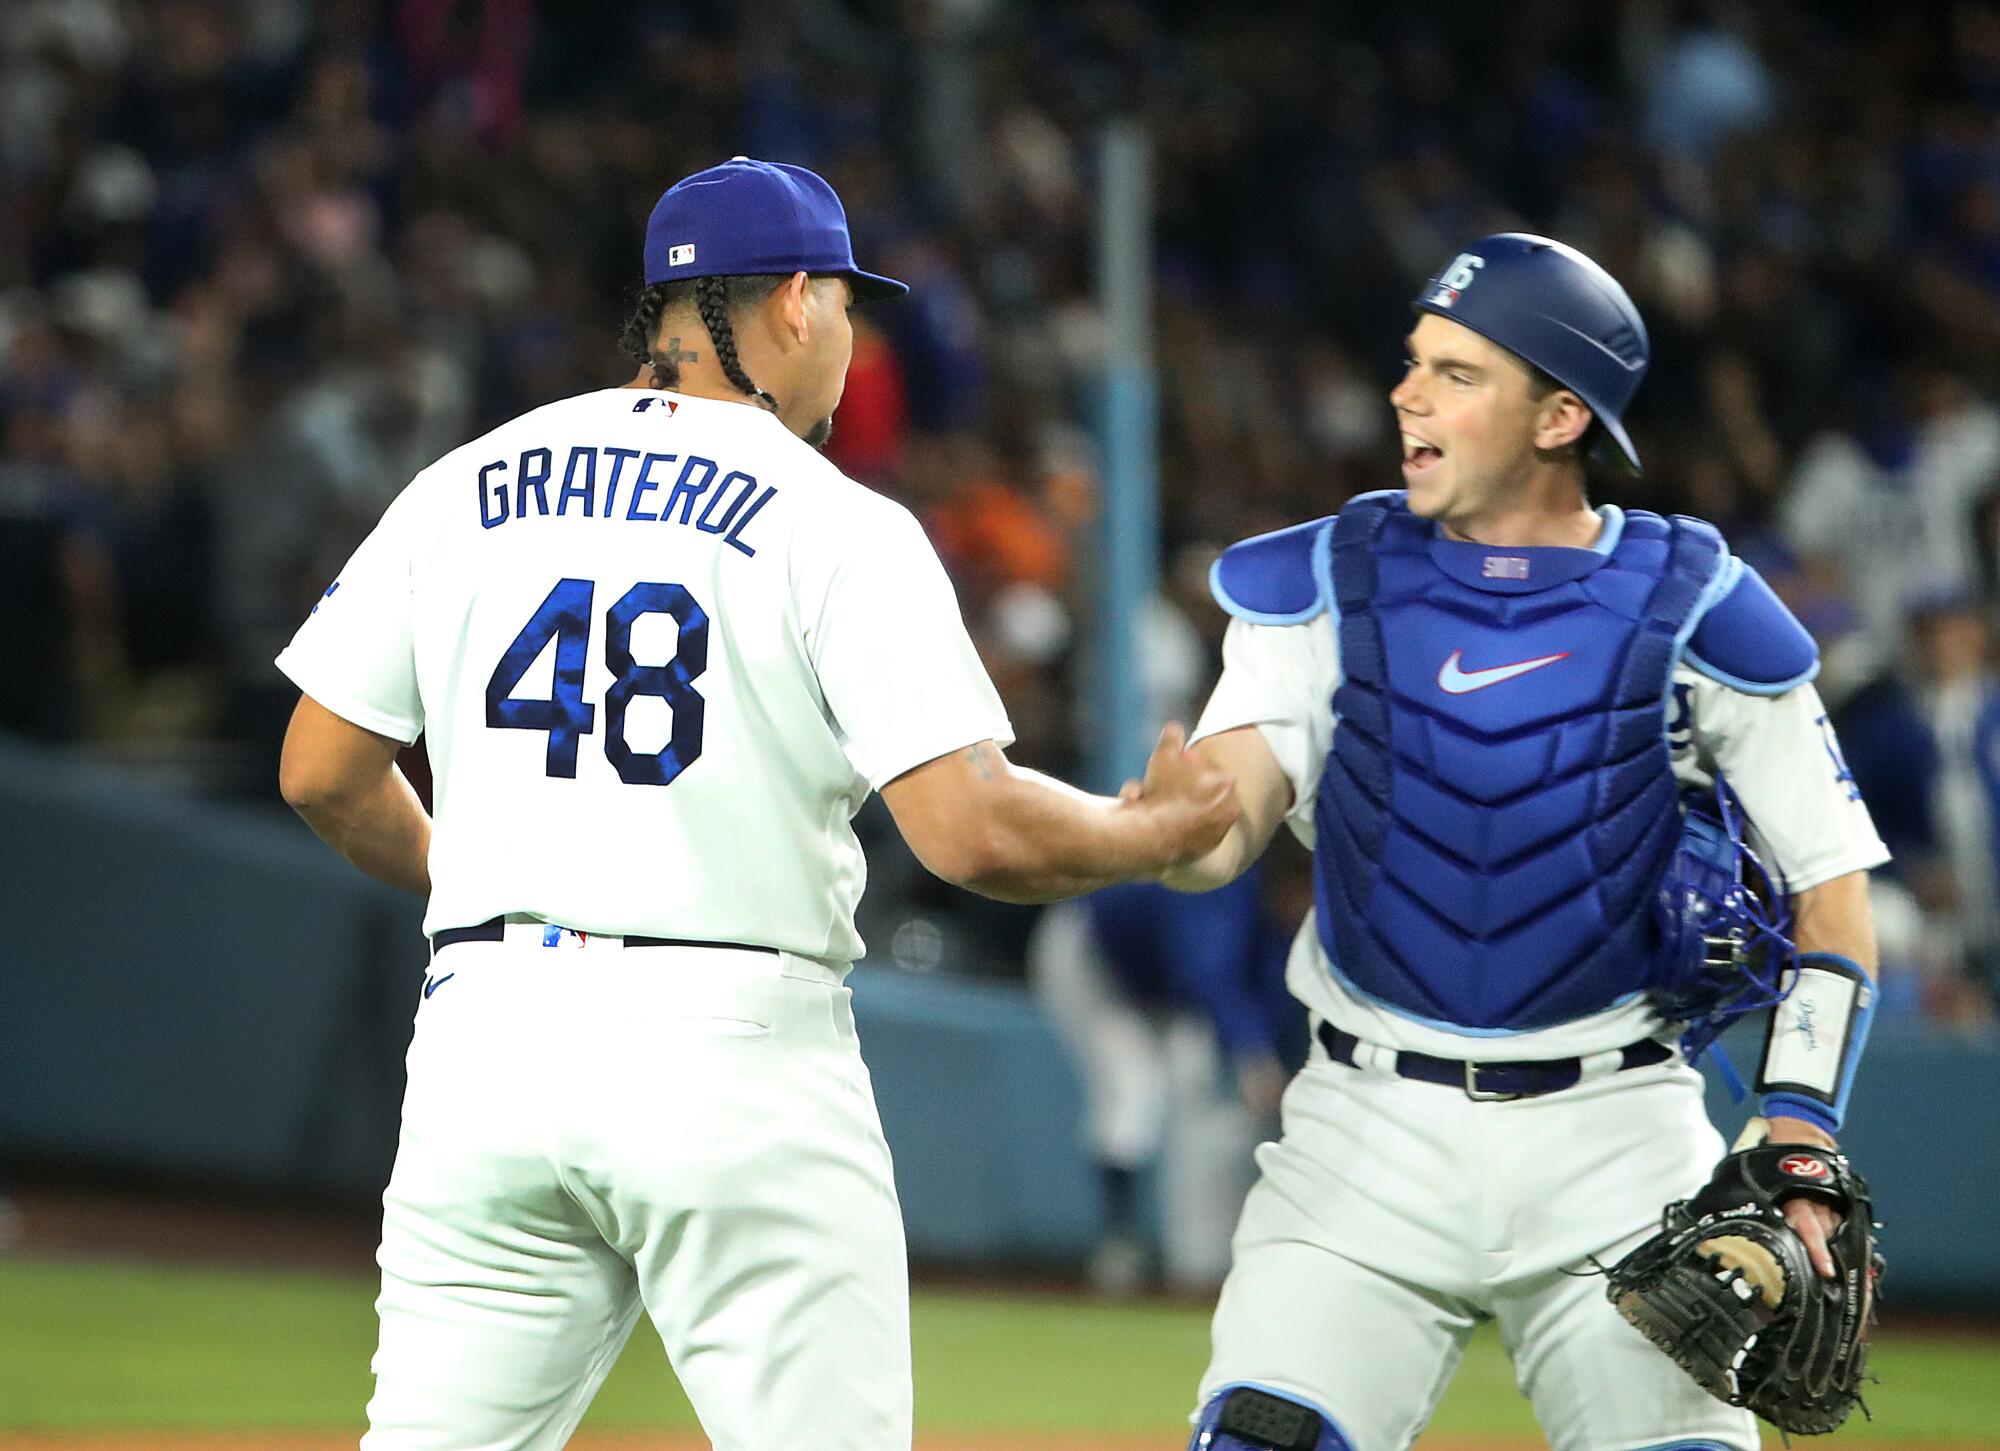 Dodgers relief pitcher Brusdar Graterol celebrates with catcher Will Smith, right, after beating the Astros on June 23.